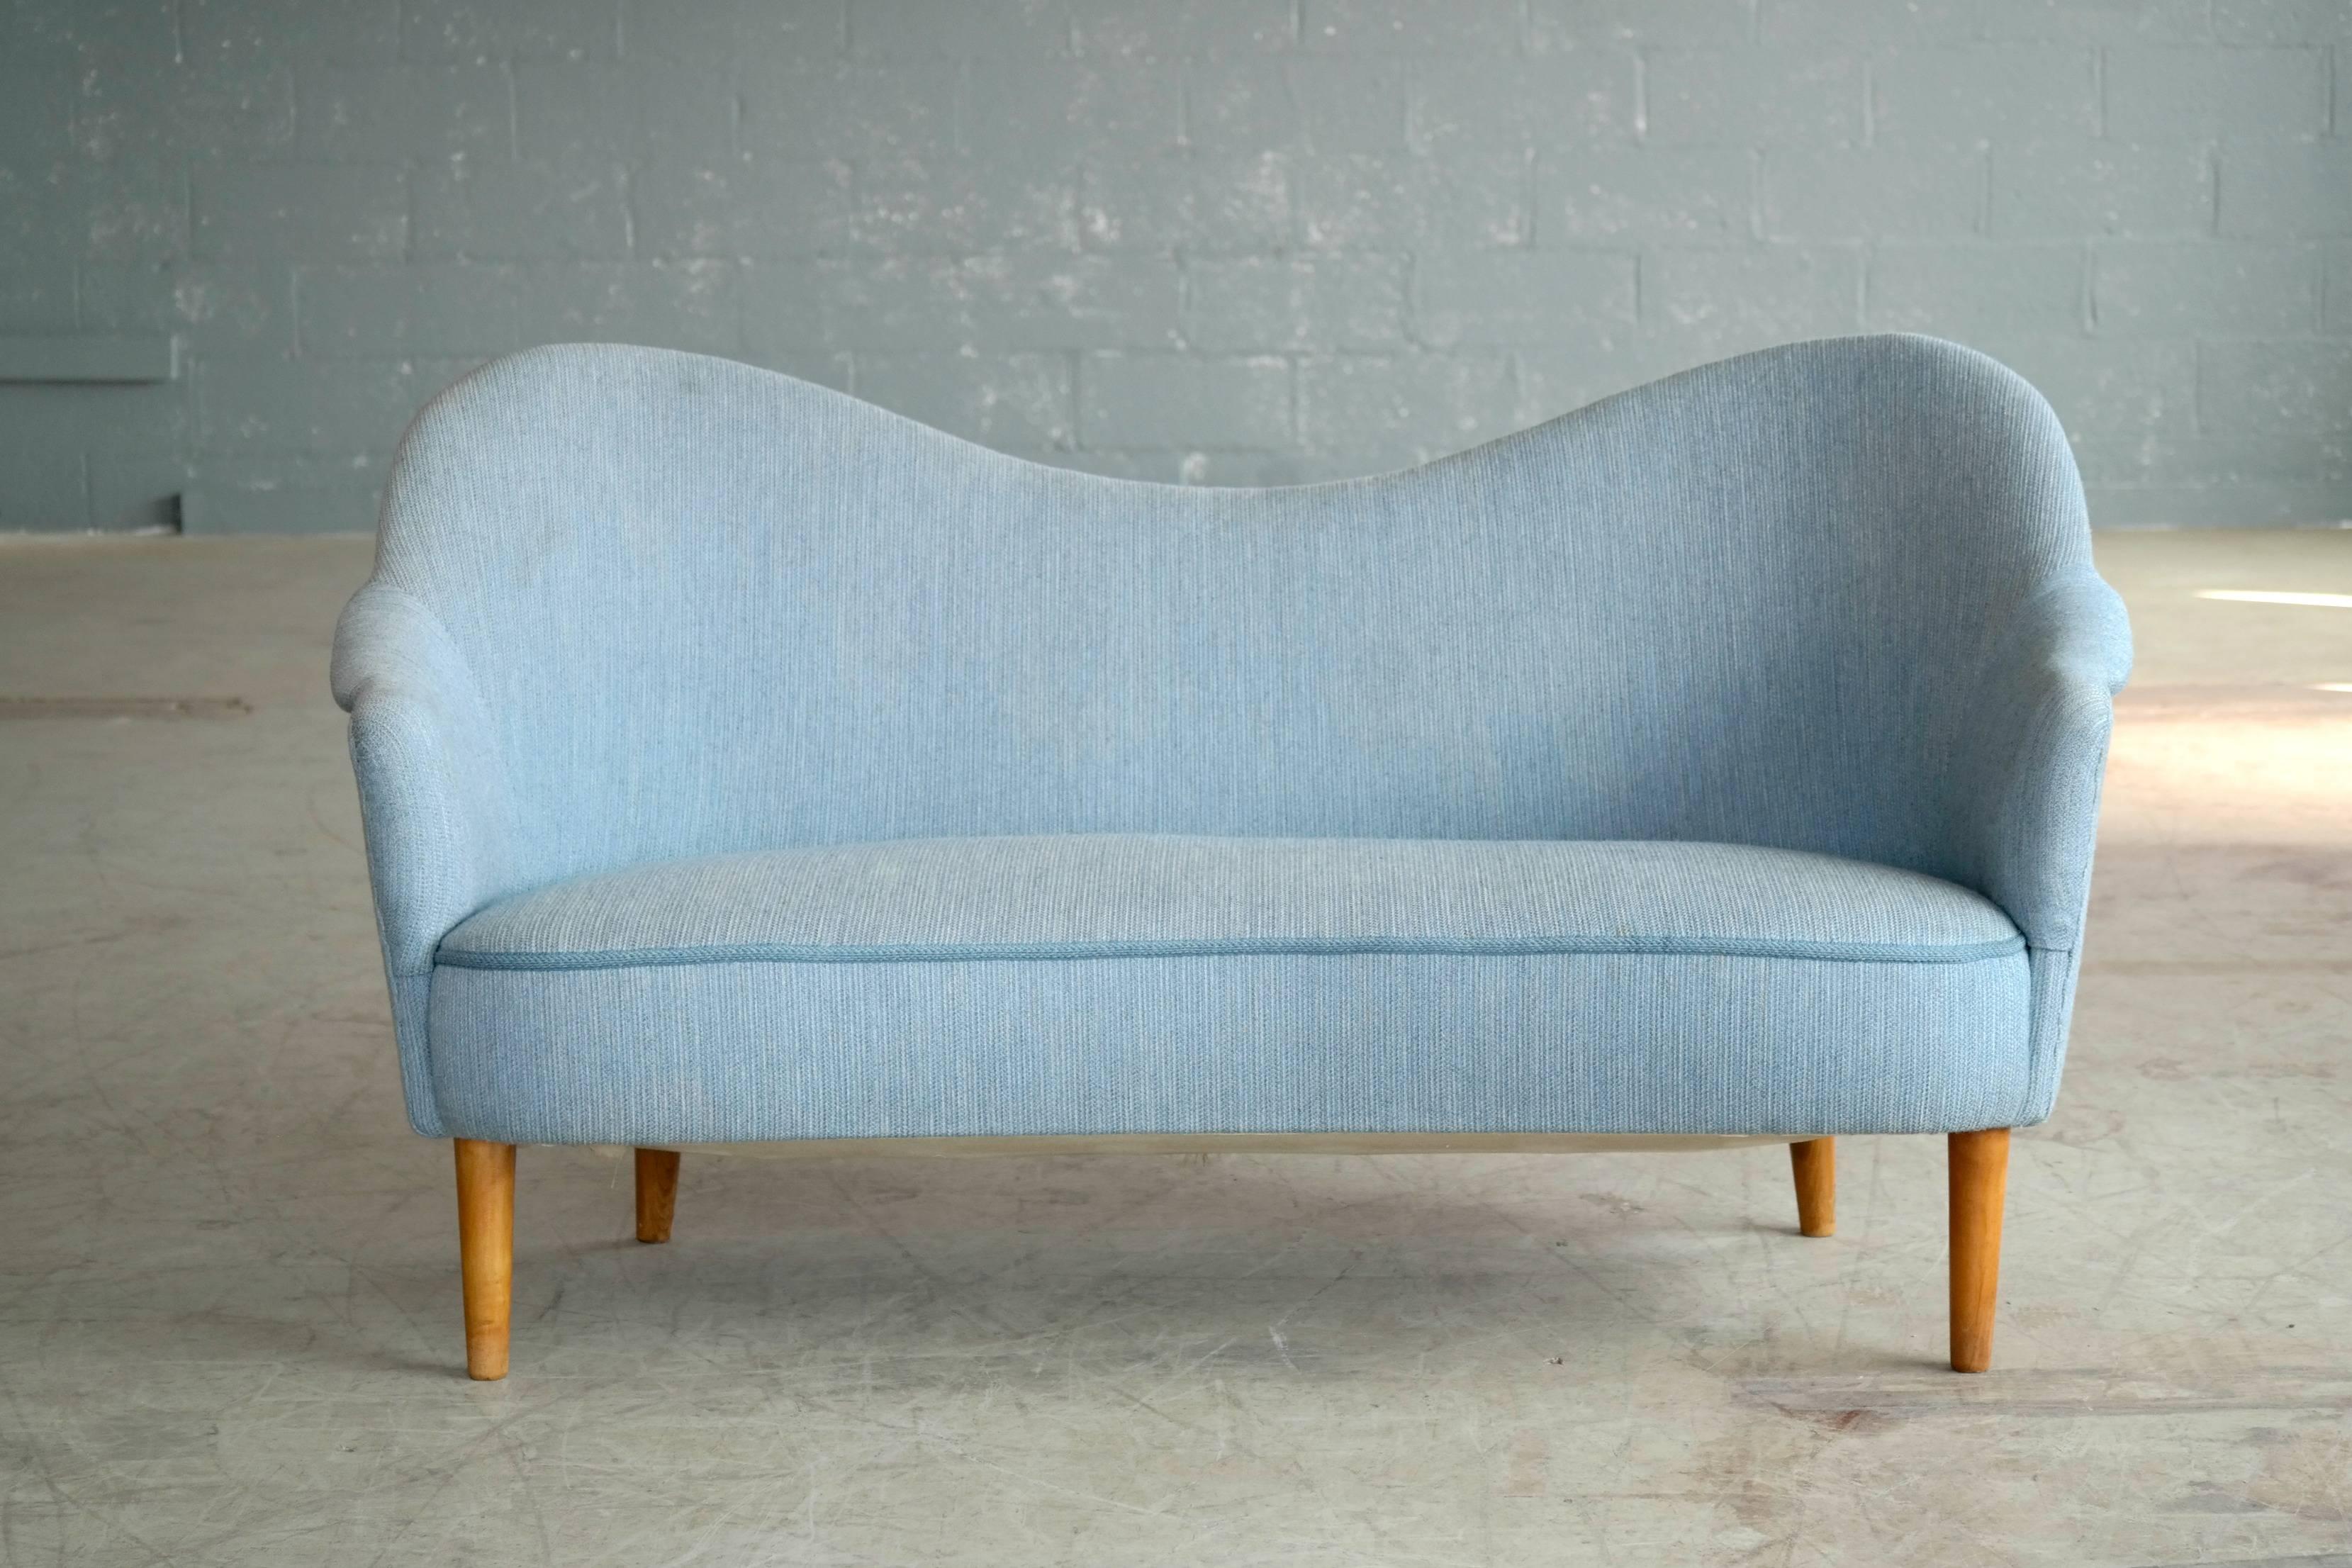 Beautiful Mid-Century 2 1/2 seat sofa model Samspel (meaning interplay in Swedish) designed by Swedish design icon, Carl Malmsten in 1955 for O.H. Sjögren, Sweden. Malmsten's work is increasingly sought after and for good reason and we are very